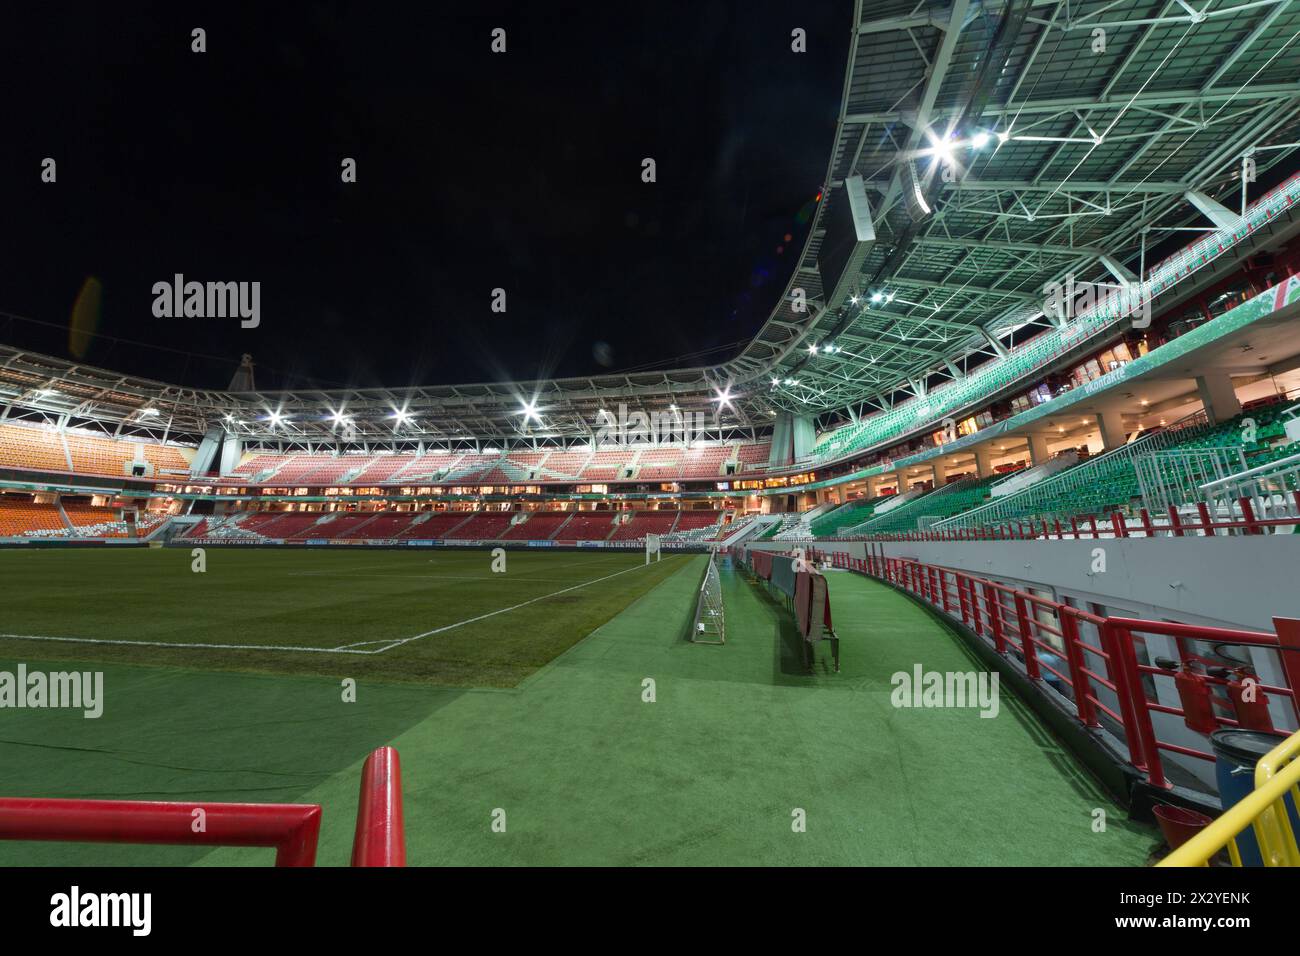 MOSCOW - SEP 7: Empty stadium after the game in the evening on September 7, 2012 in Moscow, Russia. Stock Photo